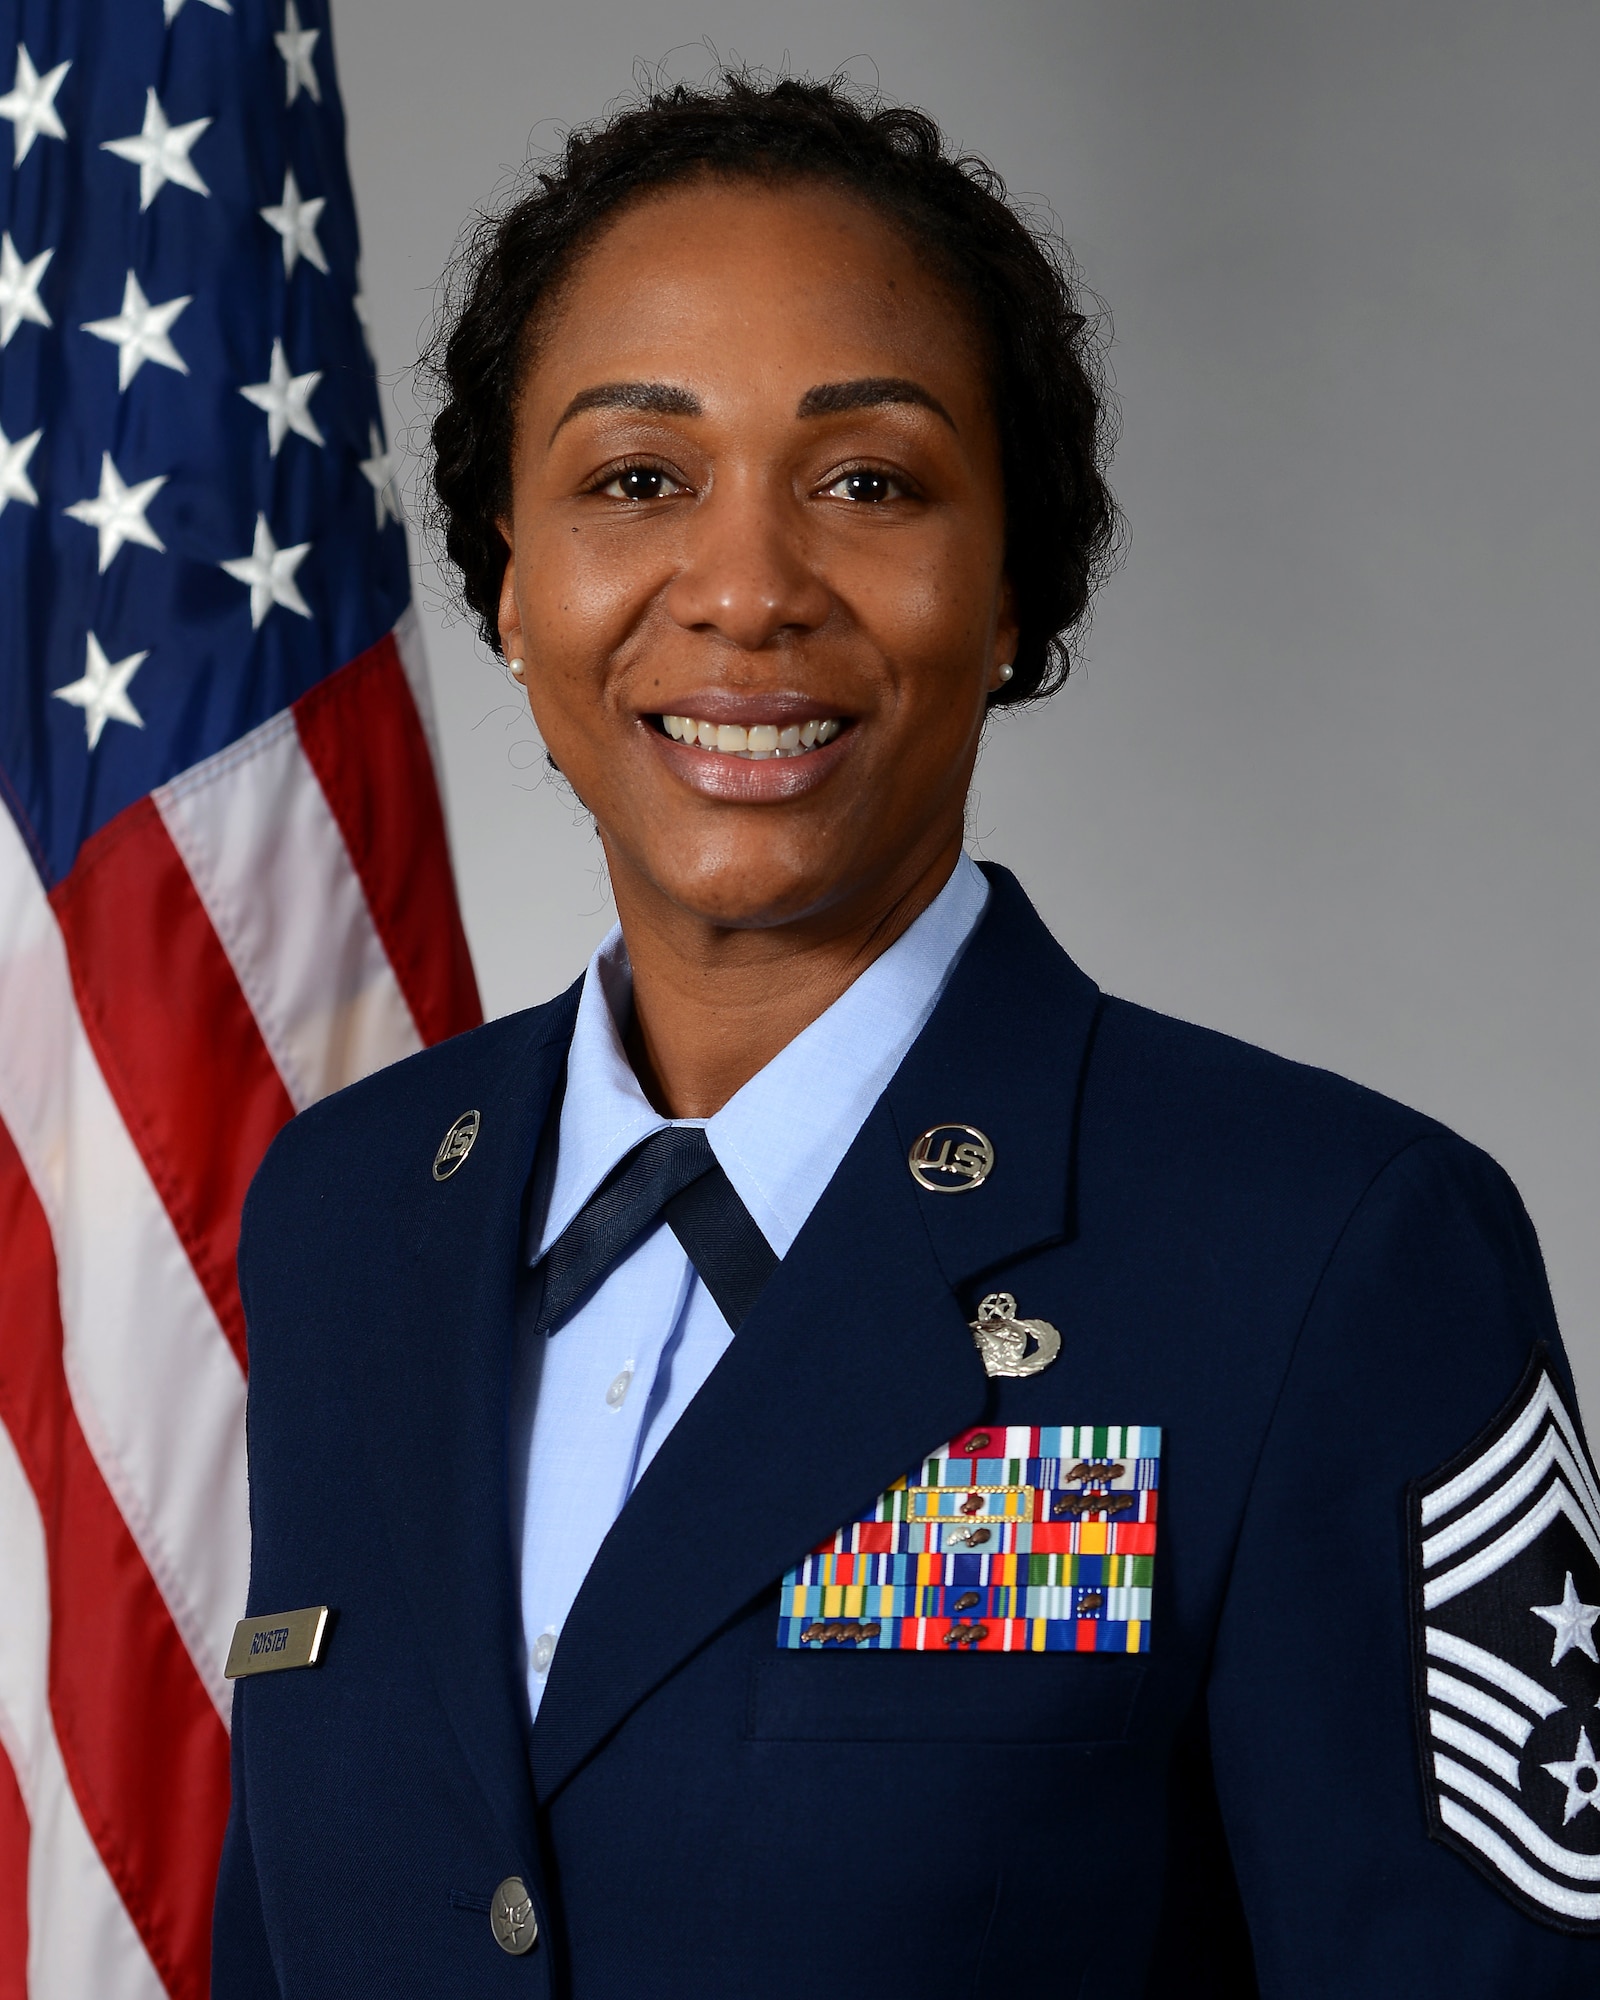 Chief Master Sgt. Melissa Royster, 22nd Air Refueling Wing command chief, poses for a photo May 5, 2019, at McConnell Air Force Base, Kansas. Royster is the first female African American Airman to serve as the command chief of the 22nd ARW. (U.S. Air Force photo by Senior Airman Michaela Slanchik)